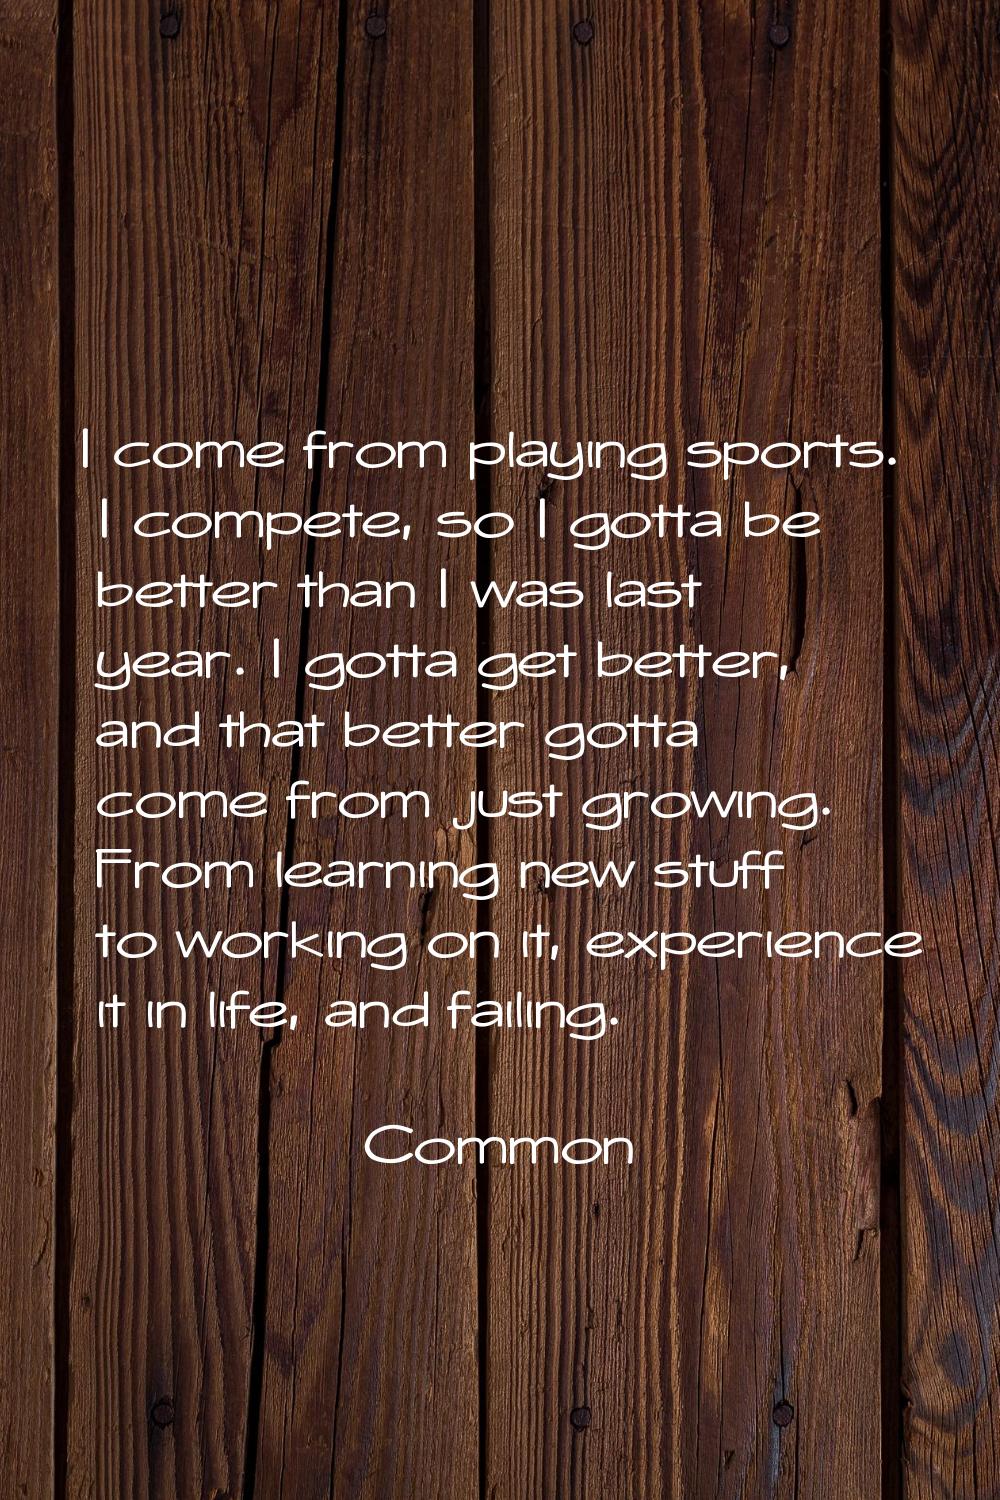 I come from playing sports. I compete, so I gotta be better than I was last year. I gotta get bette